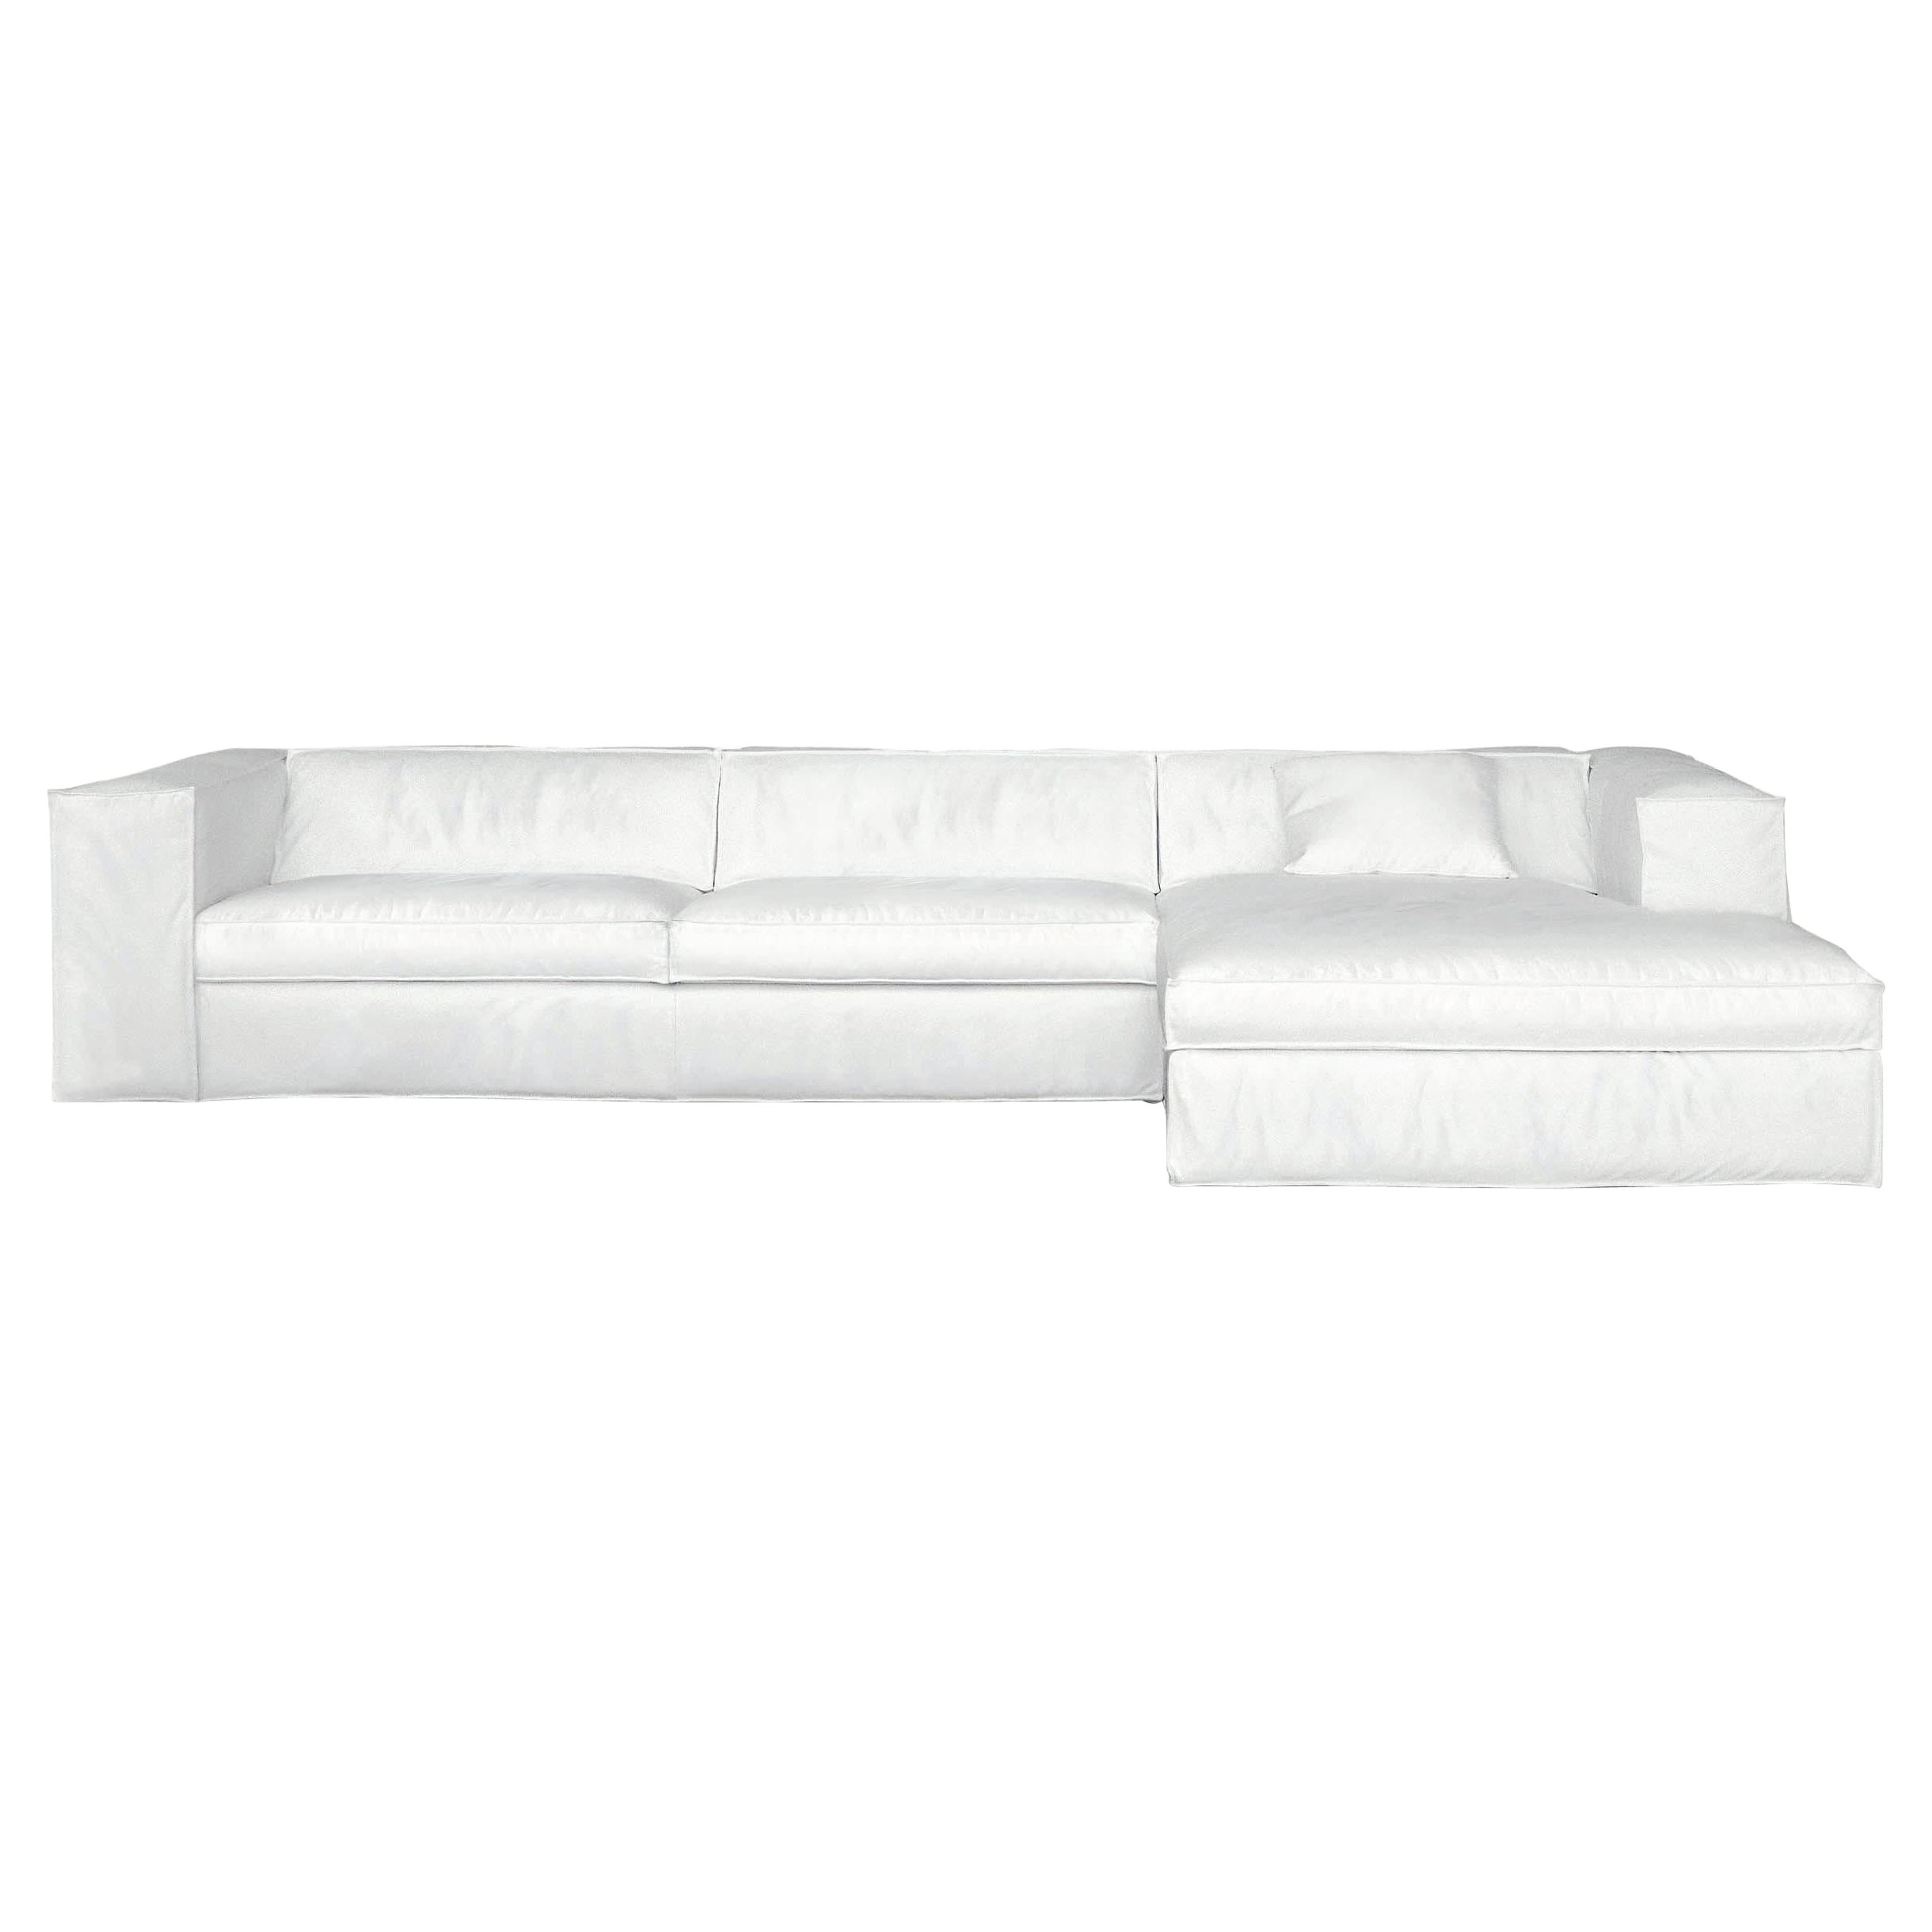 Up Small Modular Sofa in Lusso White Upholstery by Giuseppe Viganò For Sale